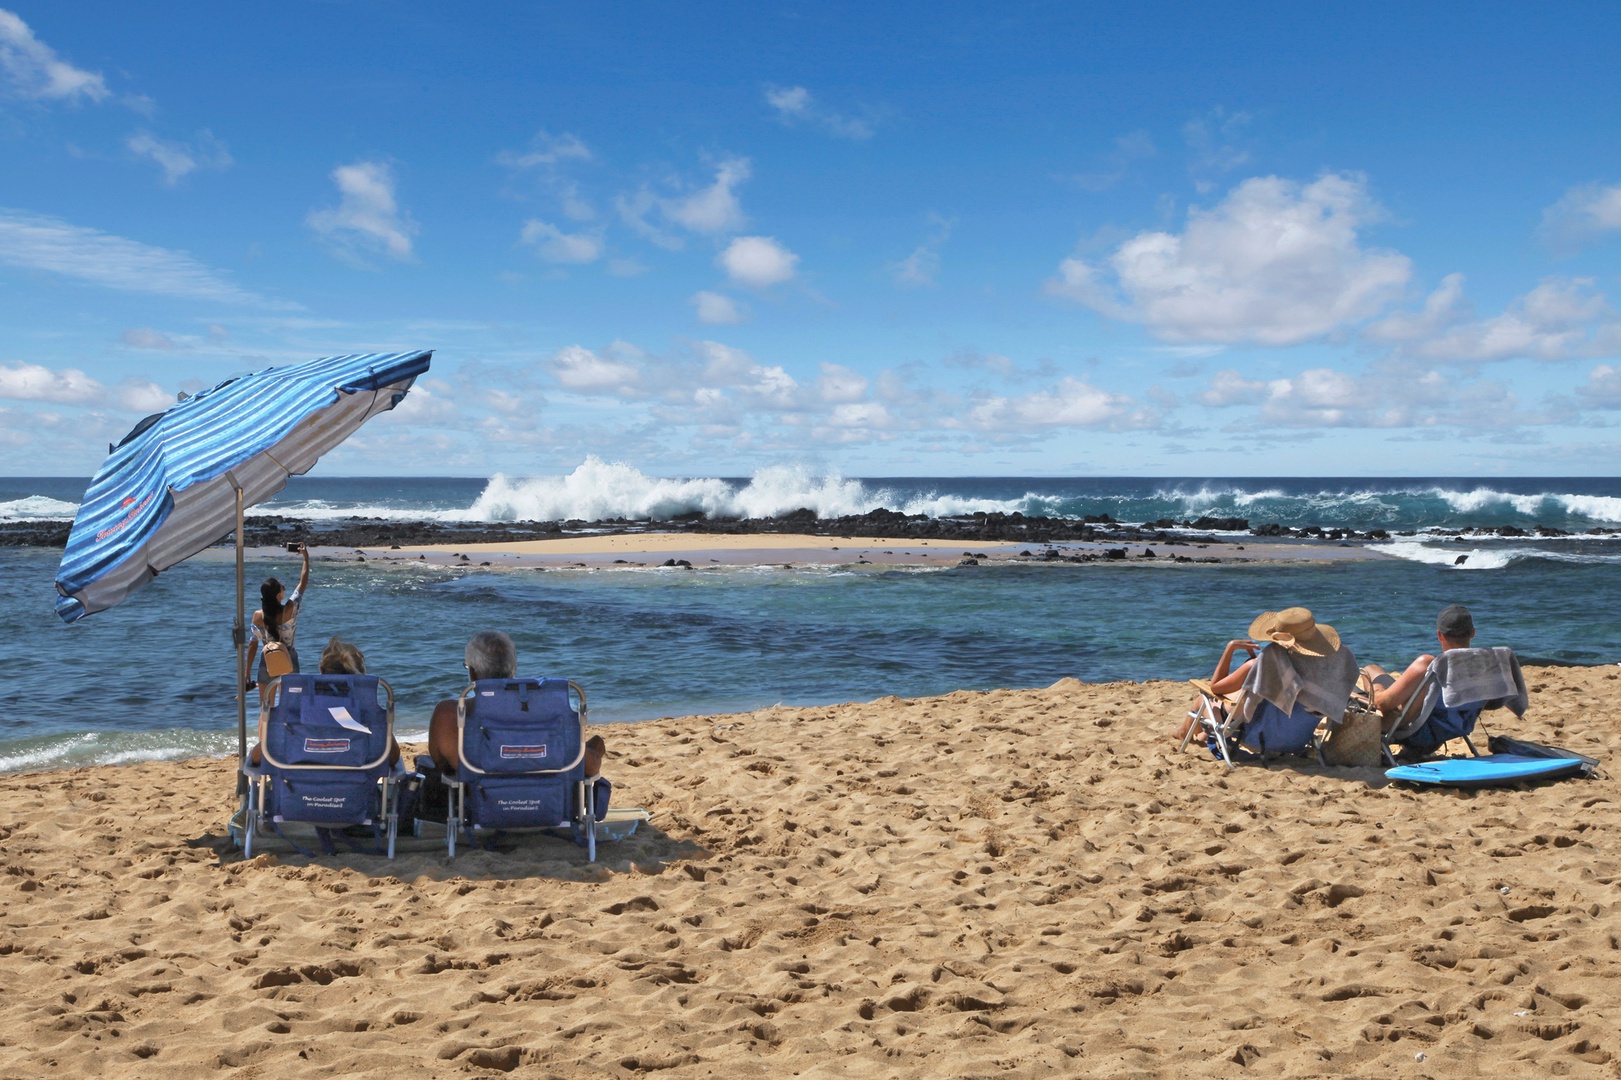 Koloa Vacation Rentals, Kauai Birdsong at Poipu Crater - Poipu Beach Park is just nearby for a stroll.